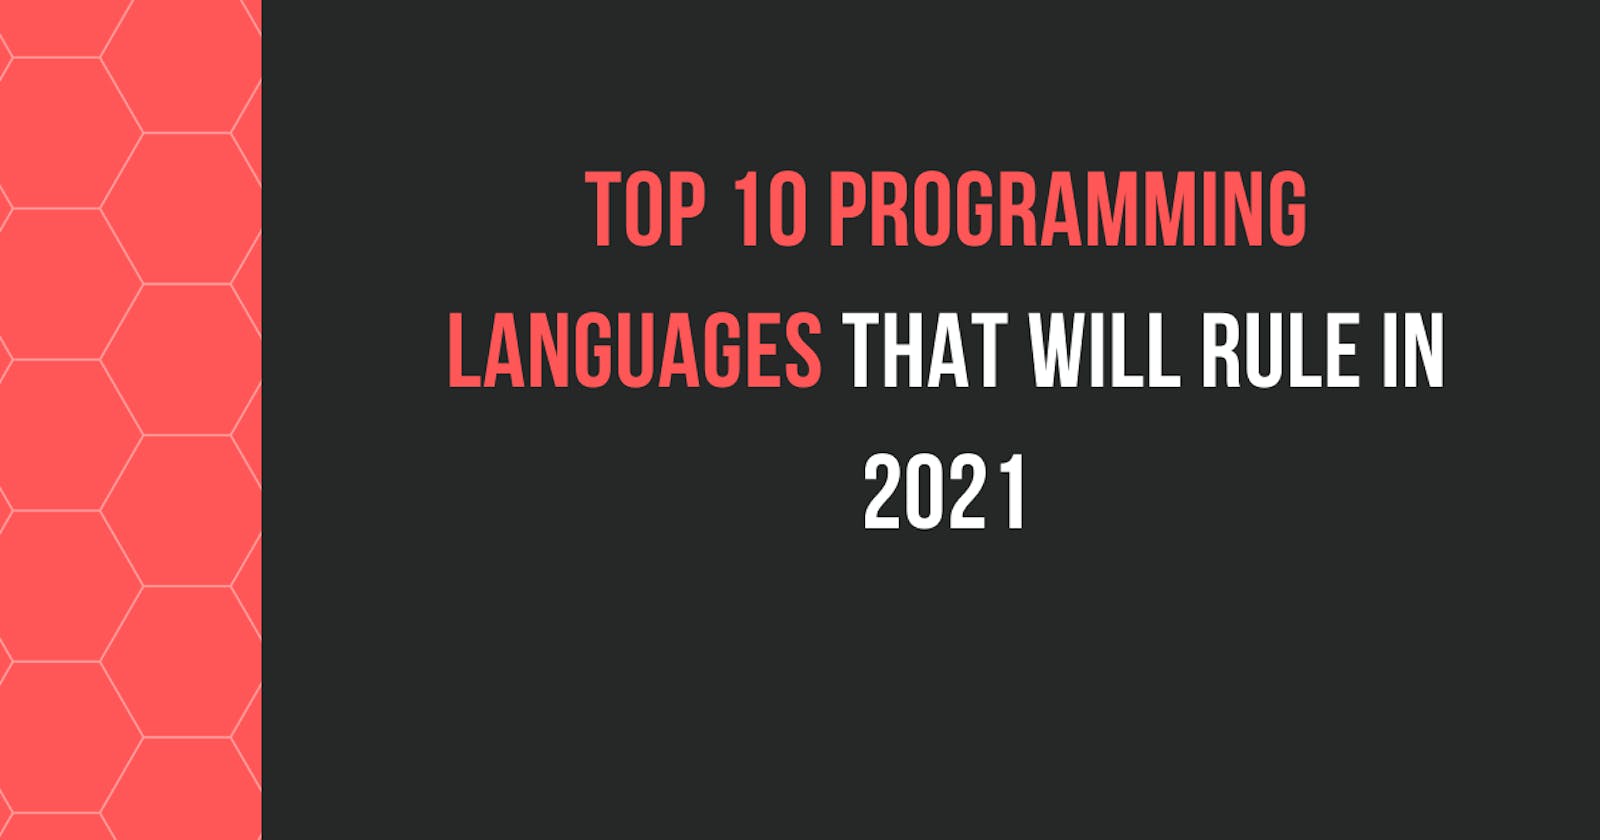 Top 10 Programming Languages That Will Rule in 2021